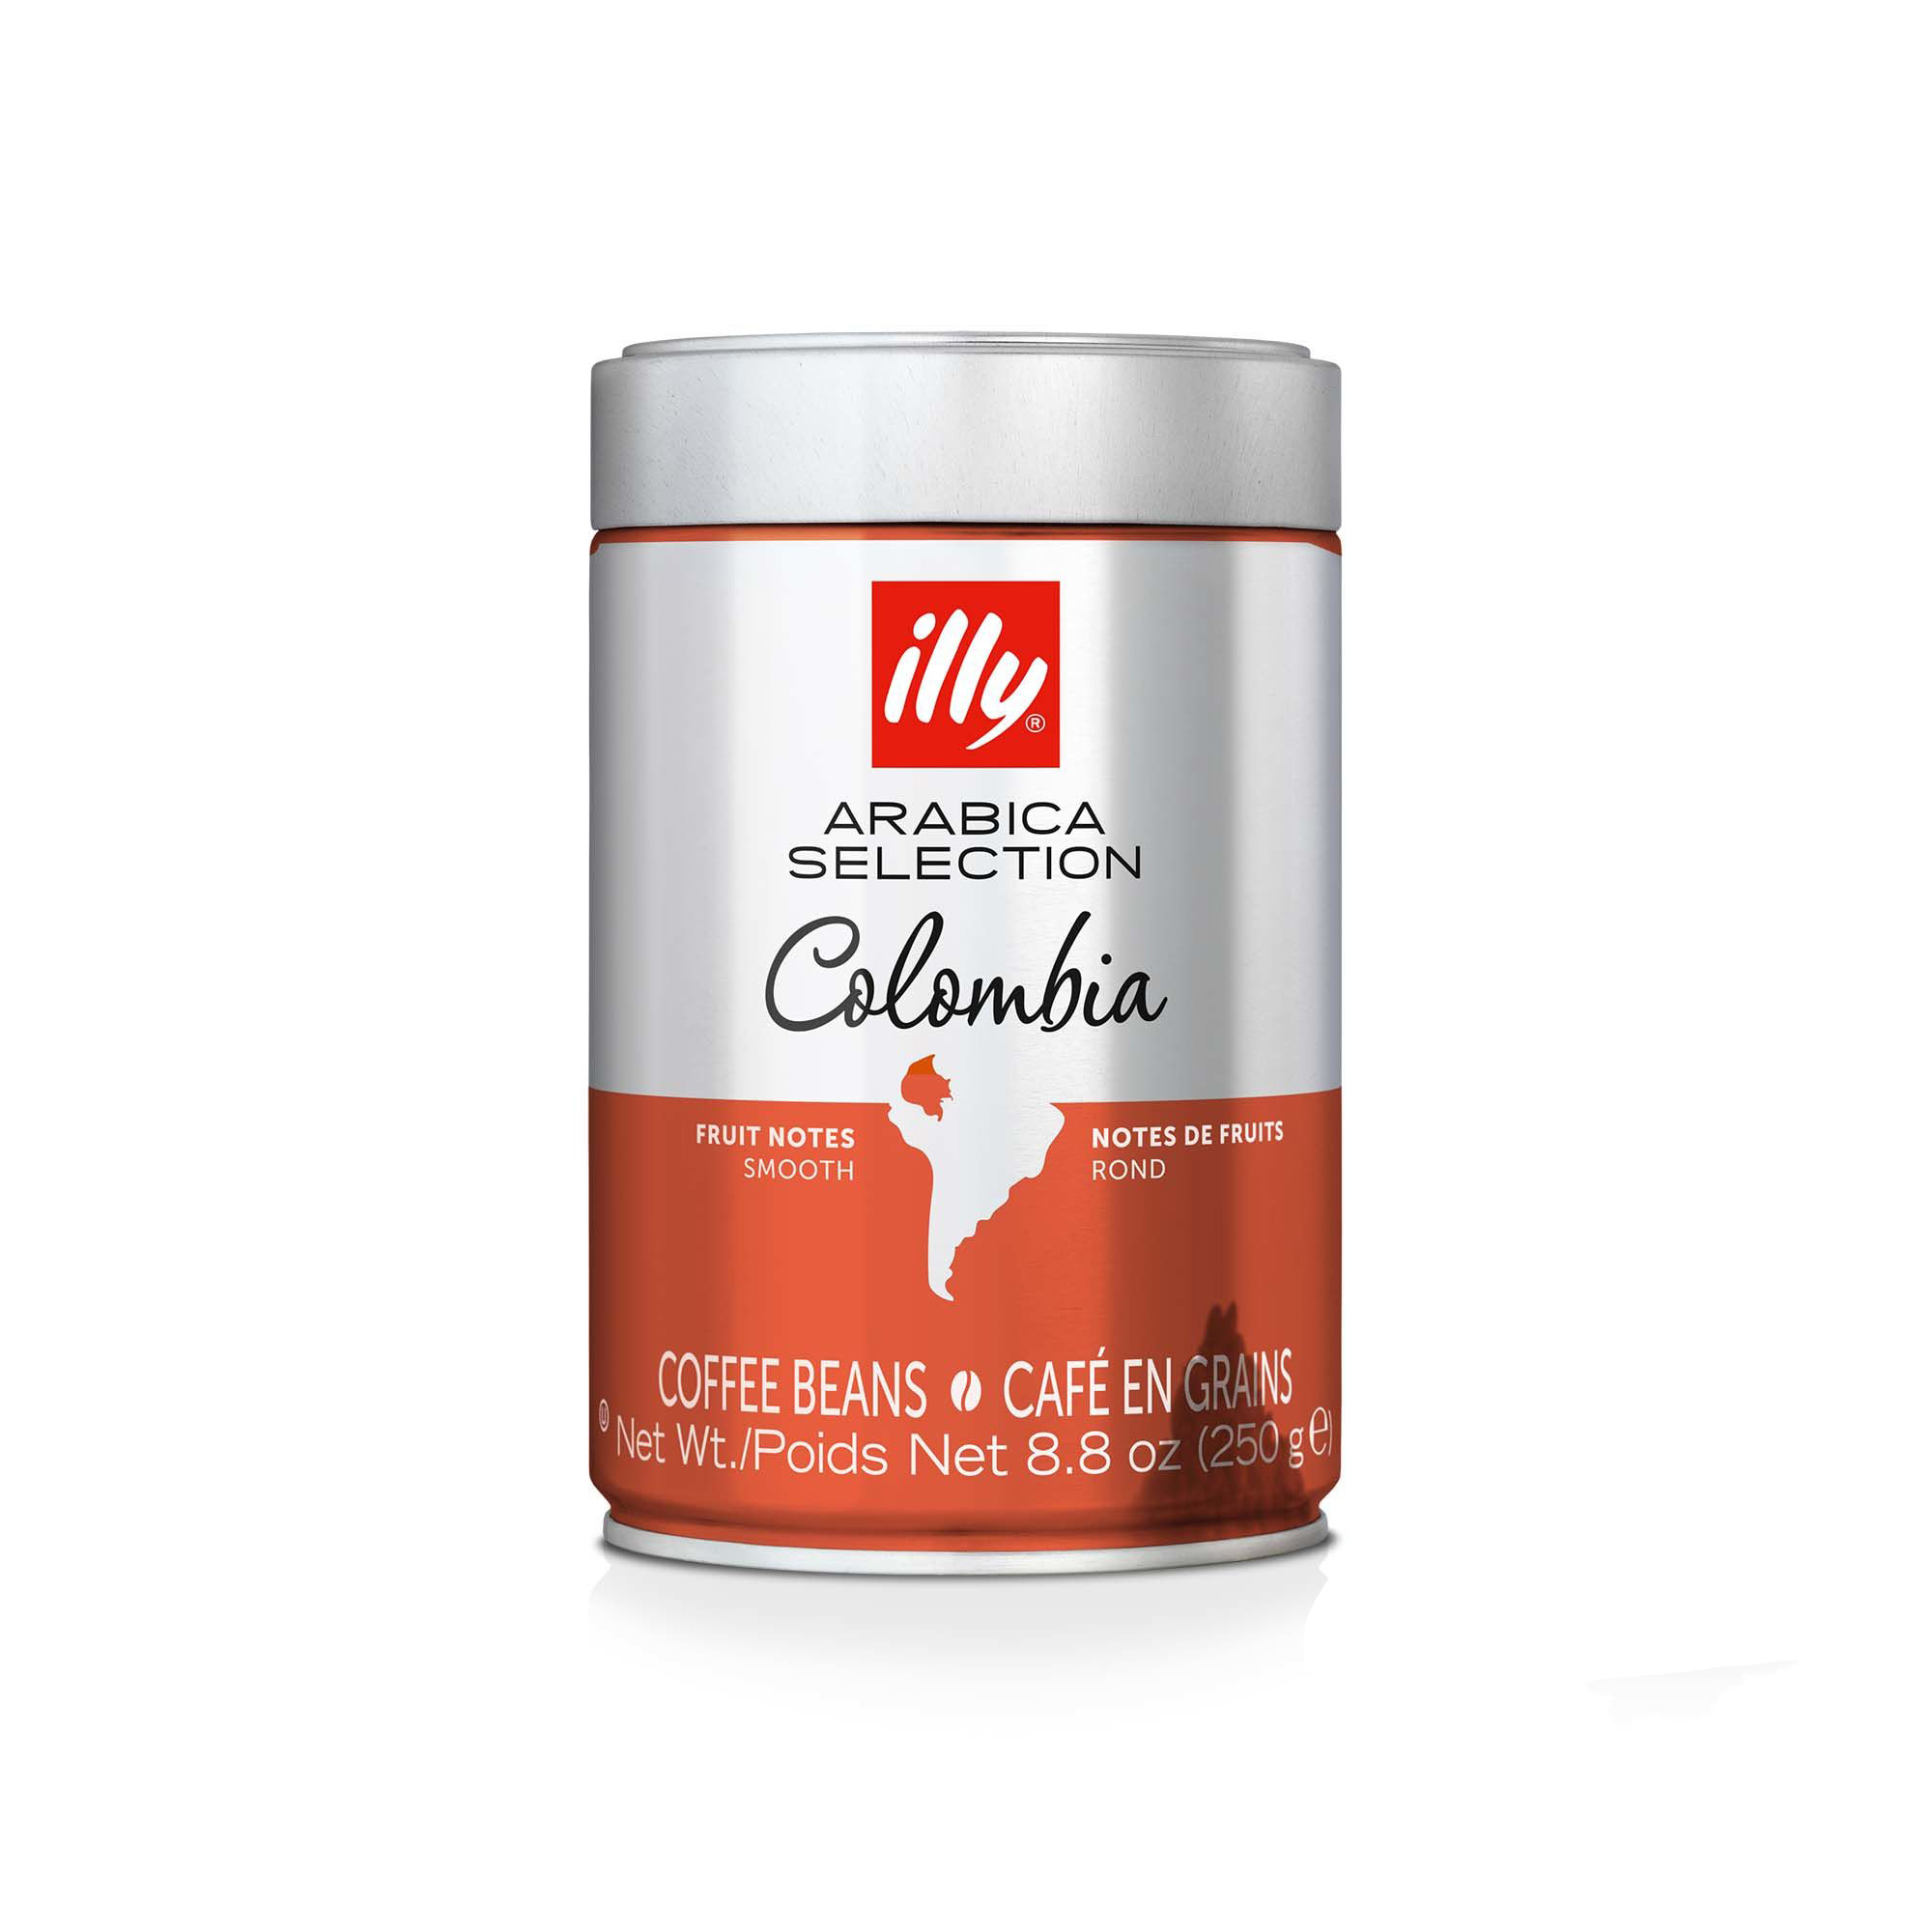 illy Arabica Selection Colombia Whole Beans 250g Tin (ORANGE) (EXP JUN 2022)